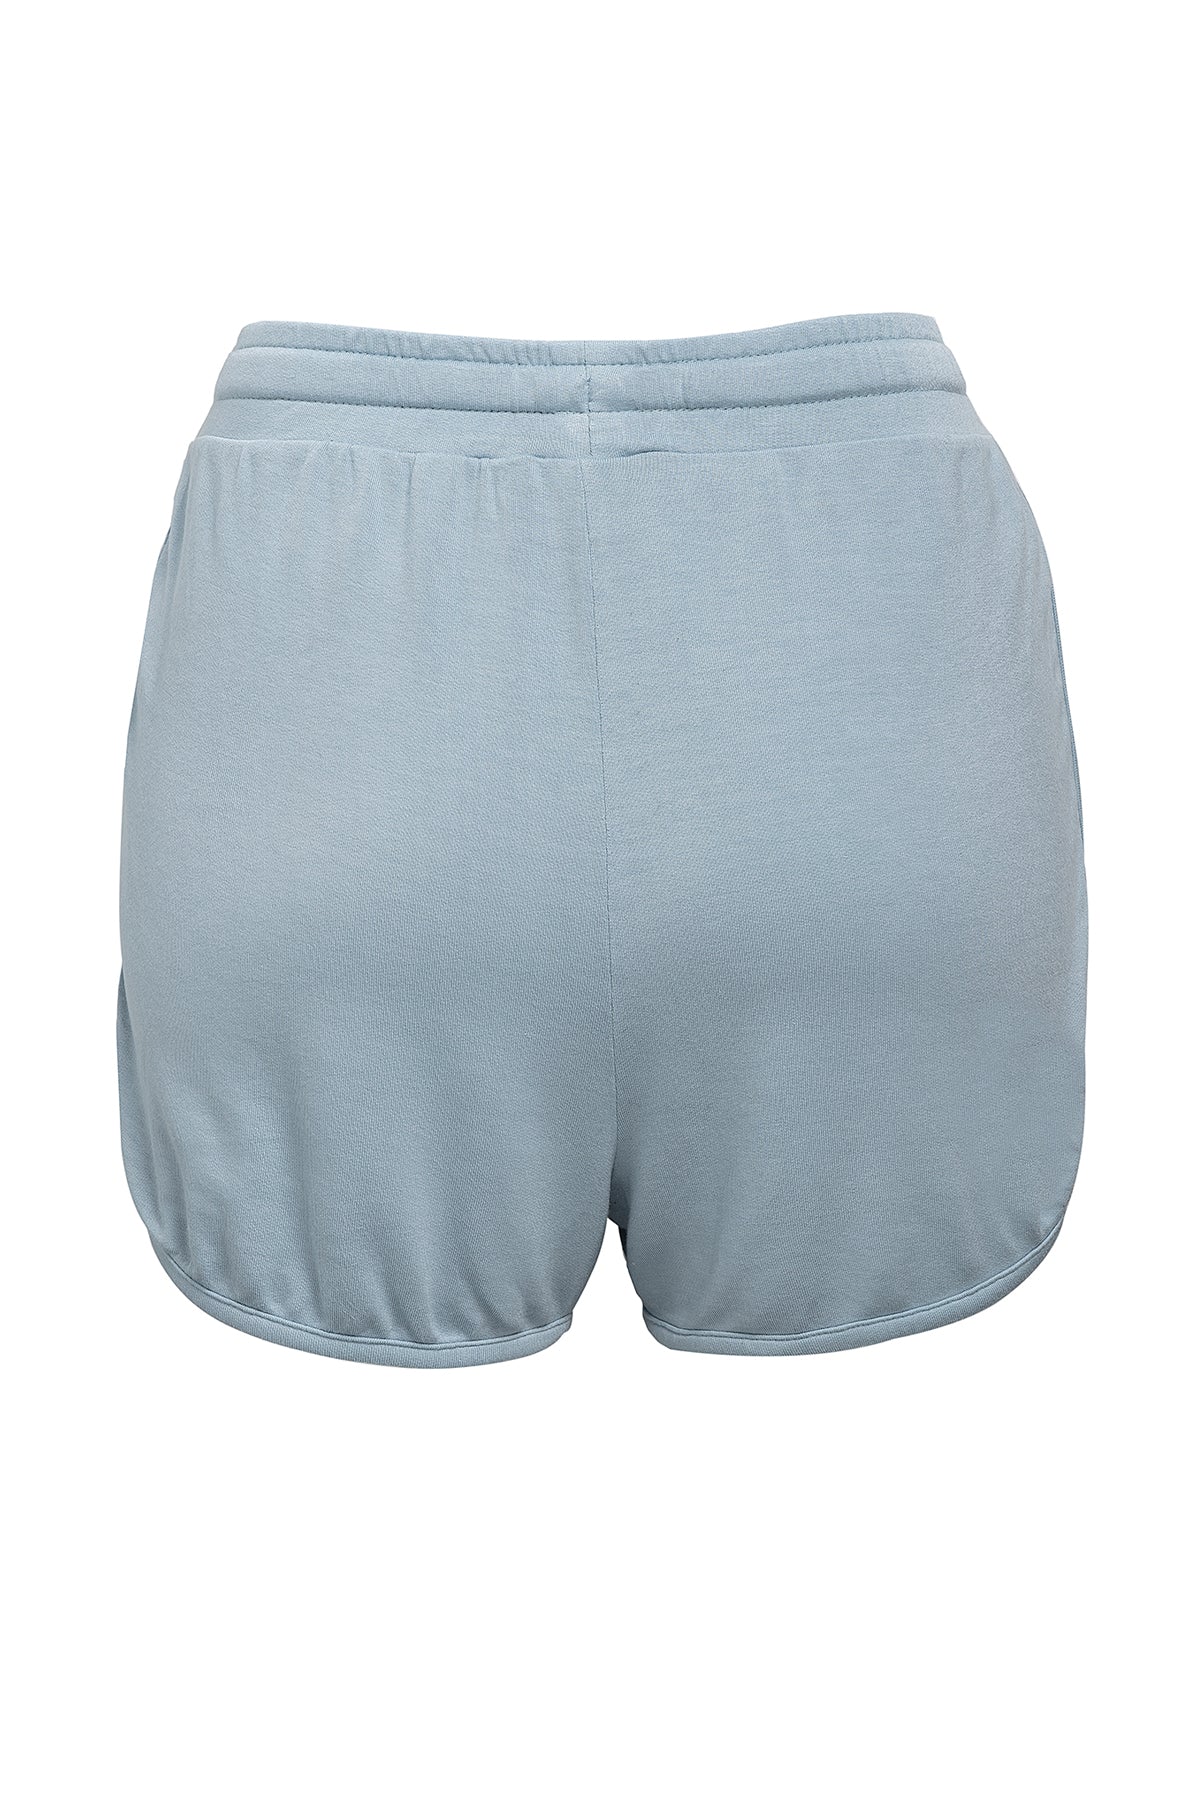 Mineral Wash French Terry Lounge Shorts